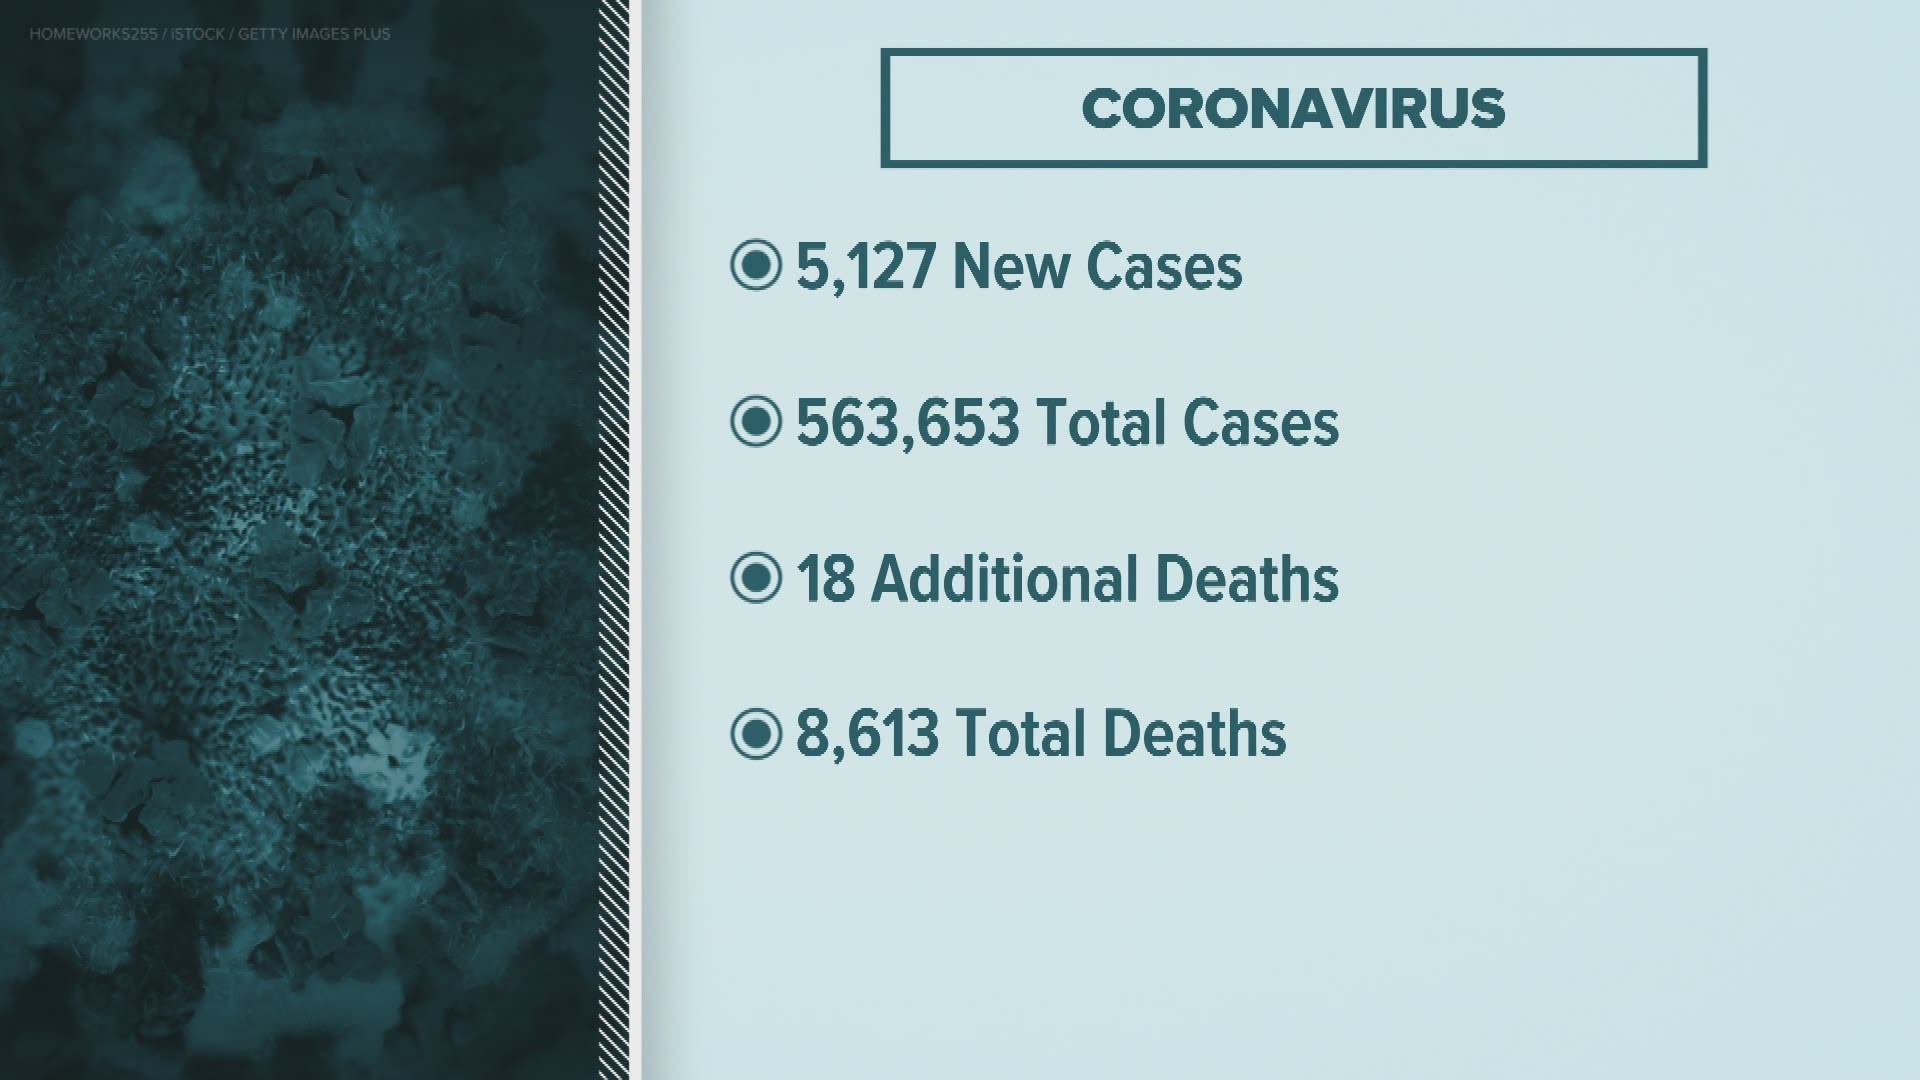 The state health department is reporting more than 5,100 new confirmed cases of COVID-19.